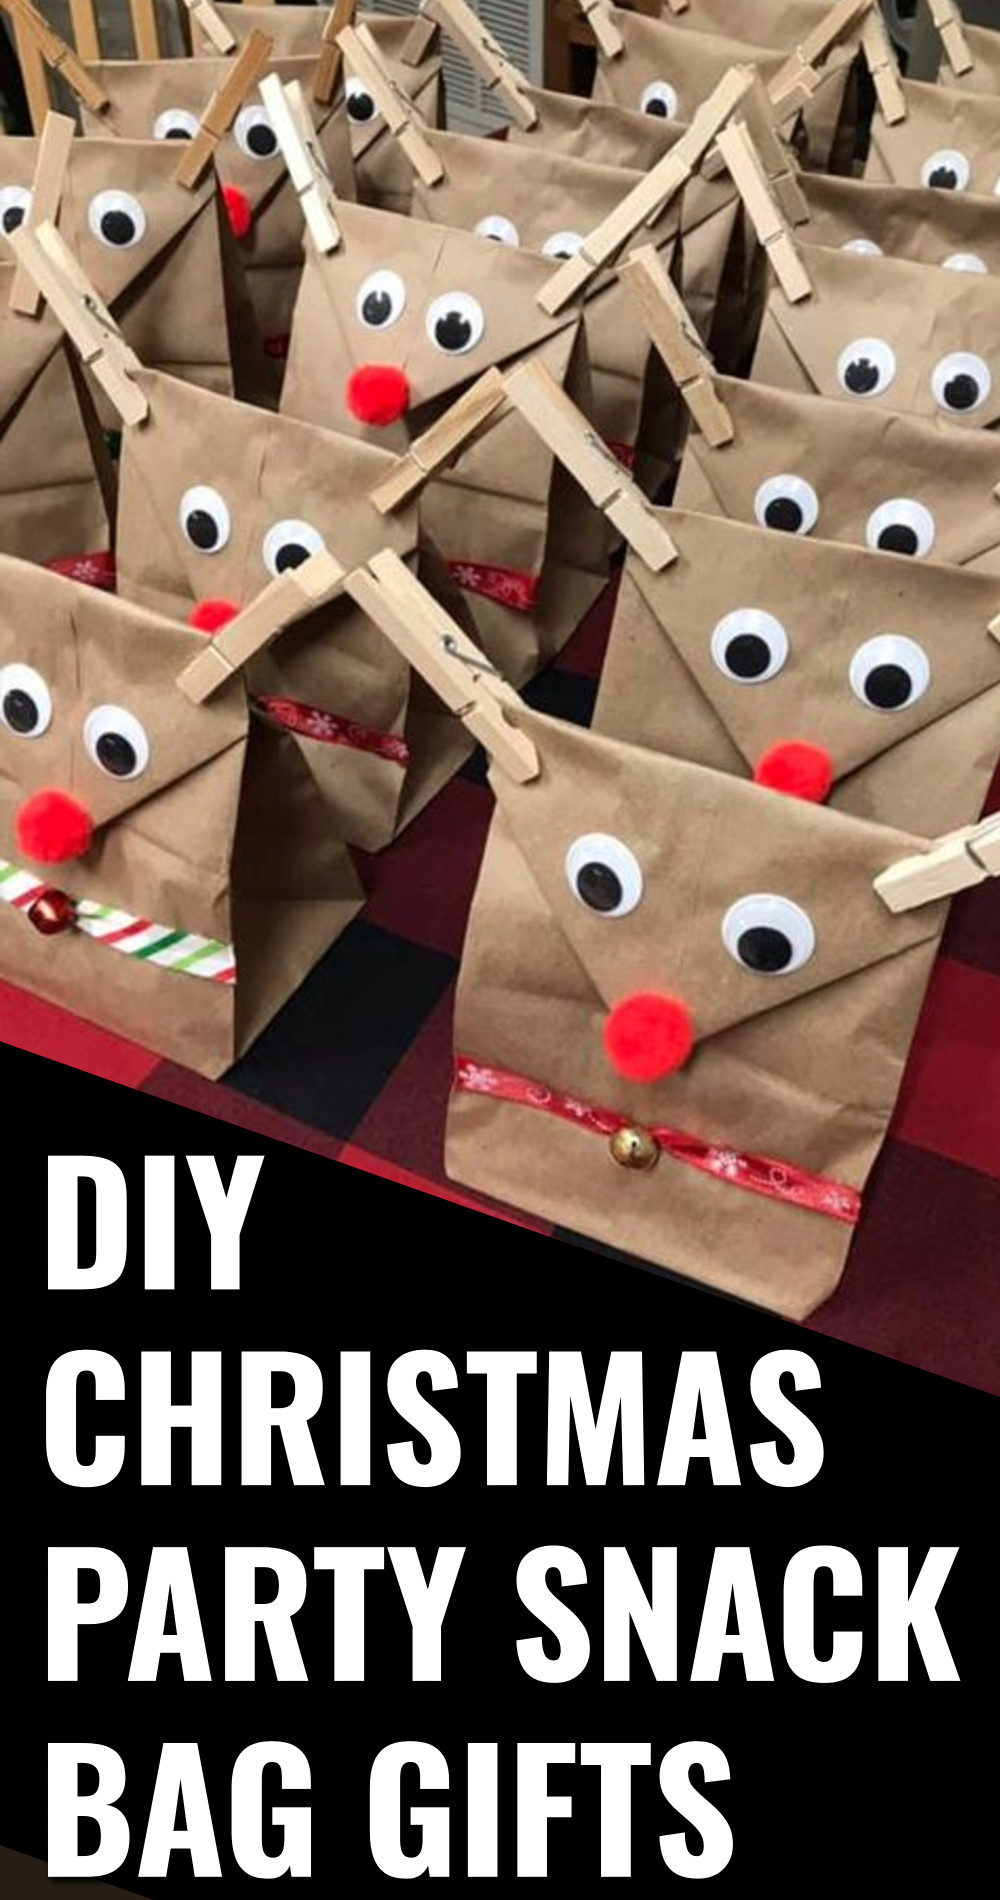 DIY Christmas Party Snack Bag Gifts